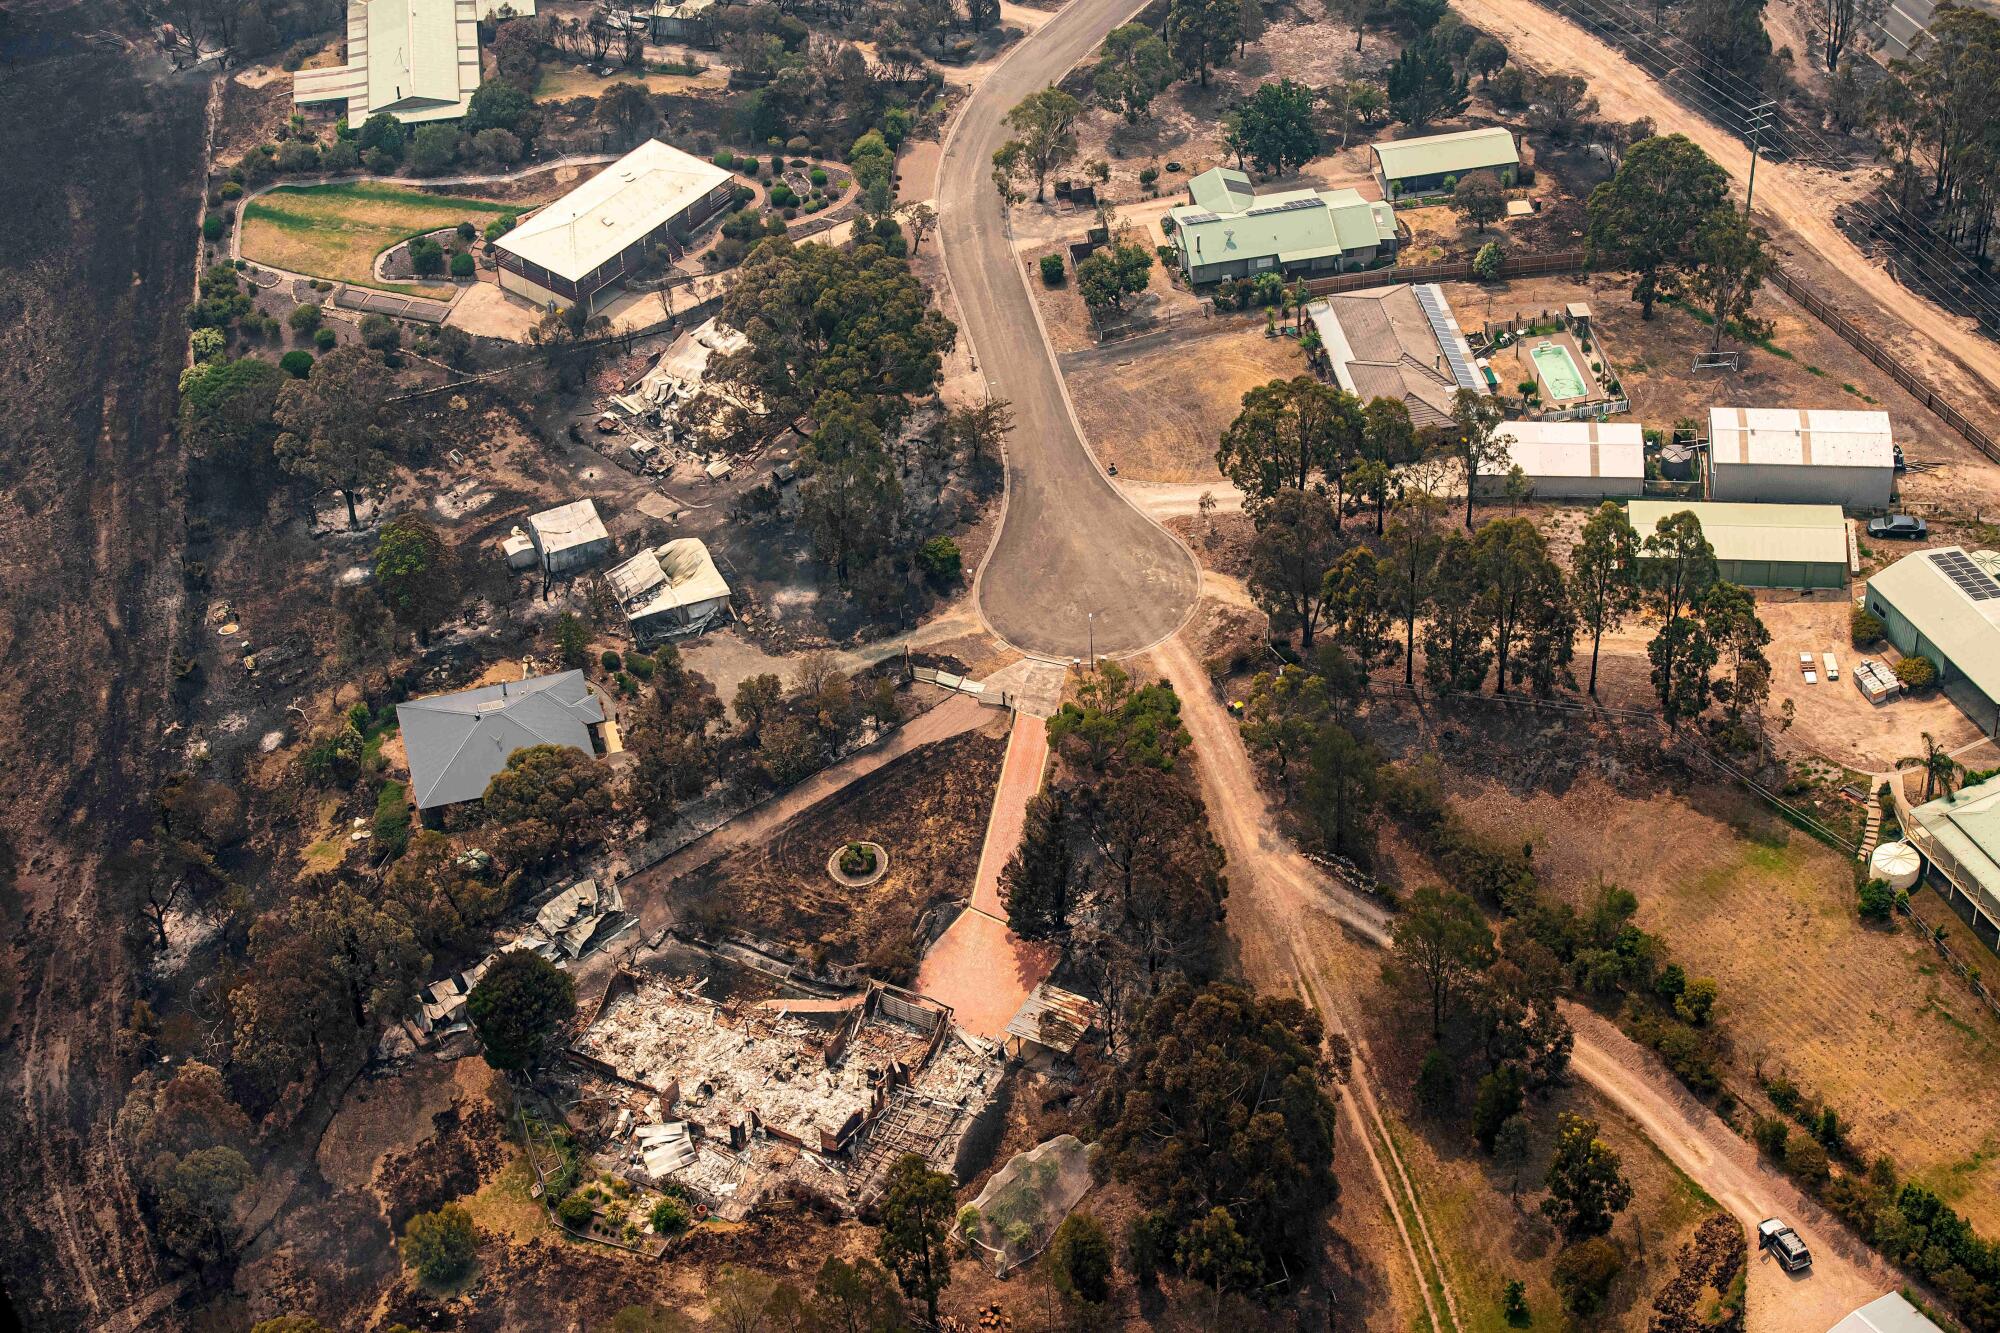 Property damaged by wildfires in Sarsfield, Australia. 